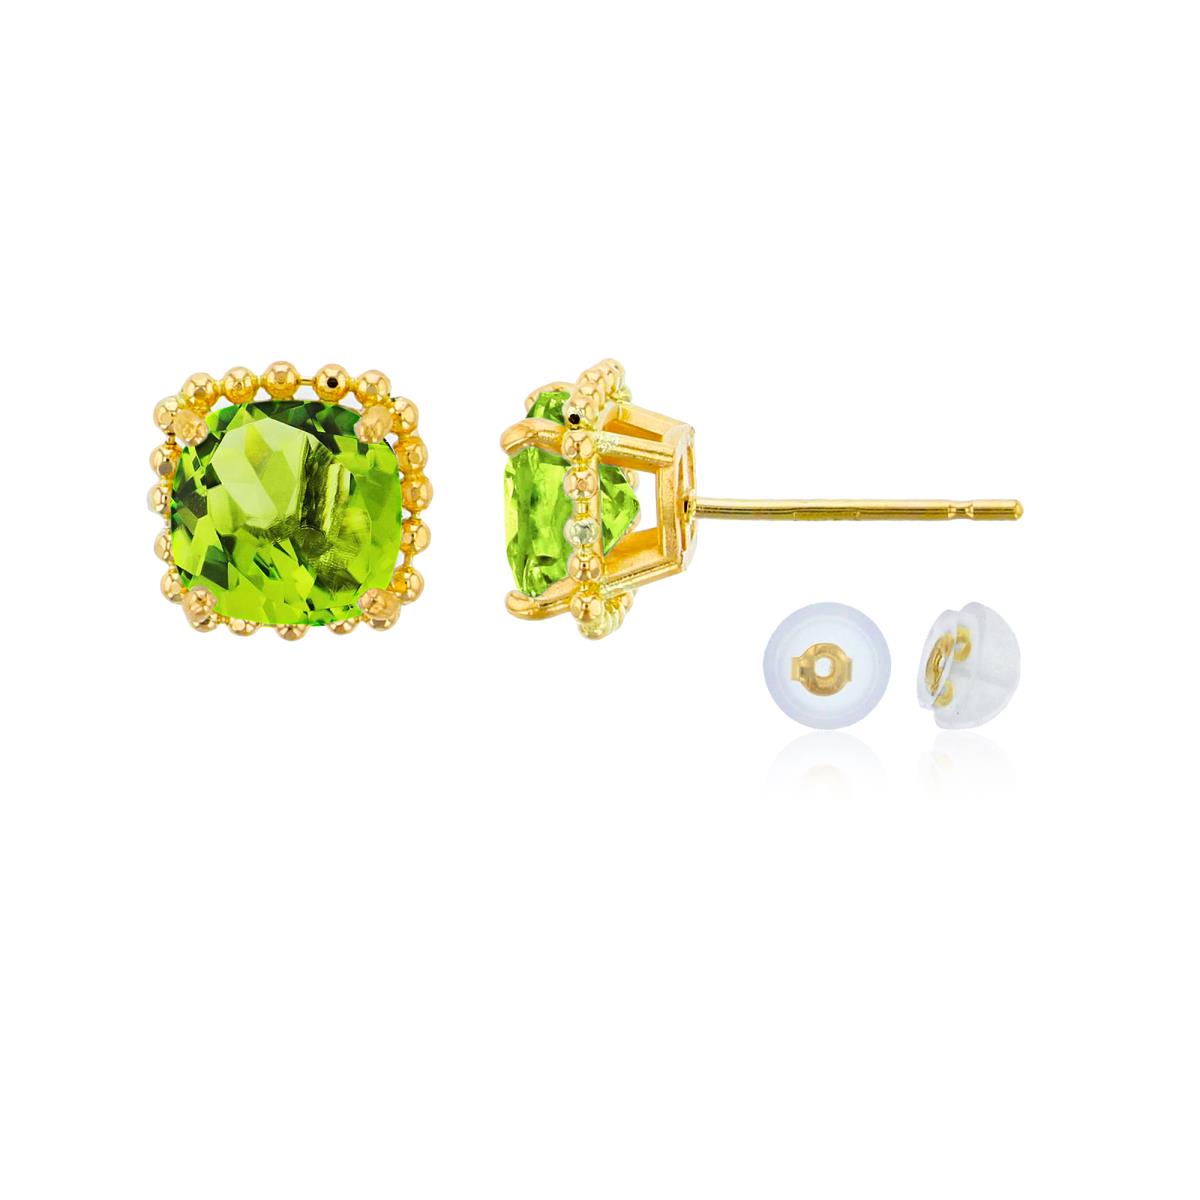 10K Yellow Gold 6x6mm Cushion Cut Peridot Bead Frame Stud Earring with Silicone Back